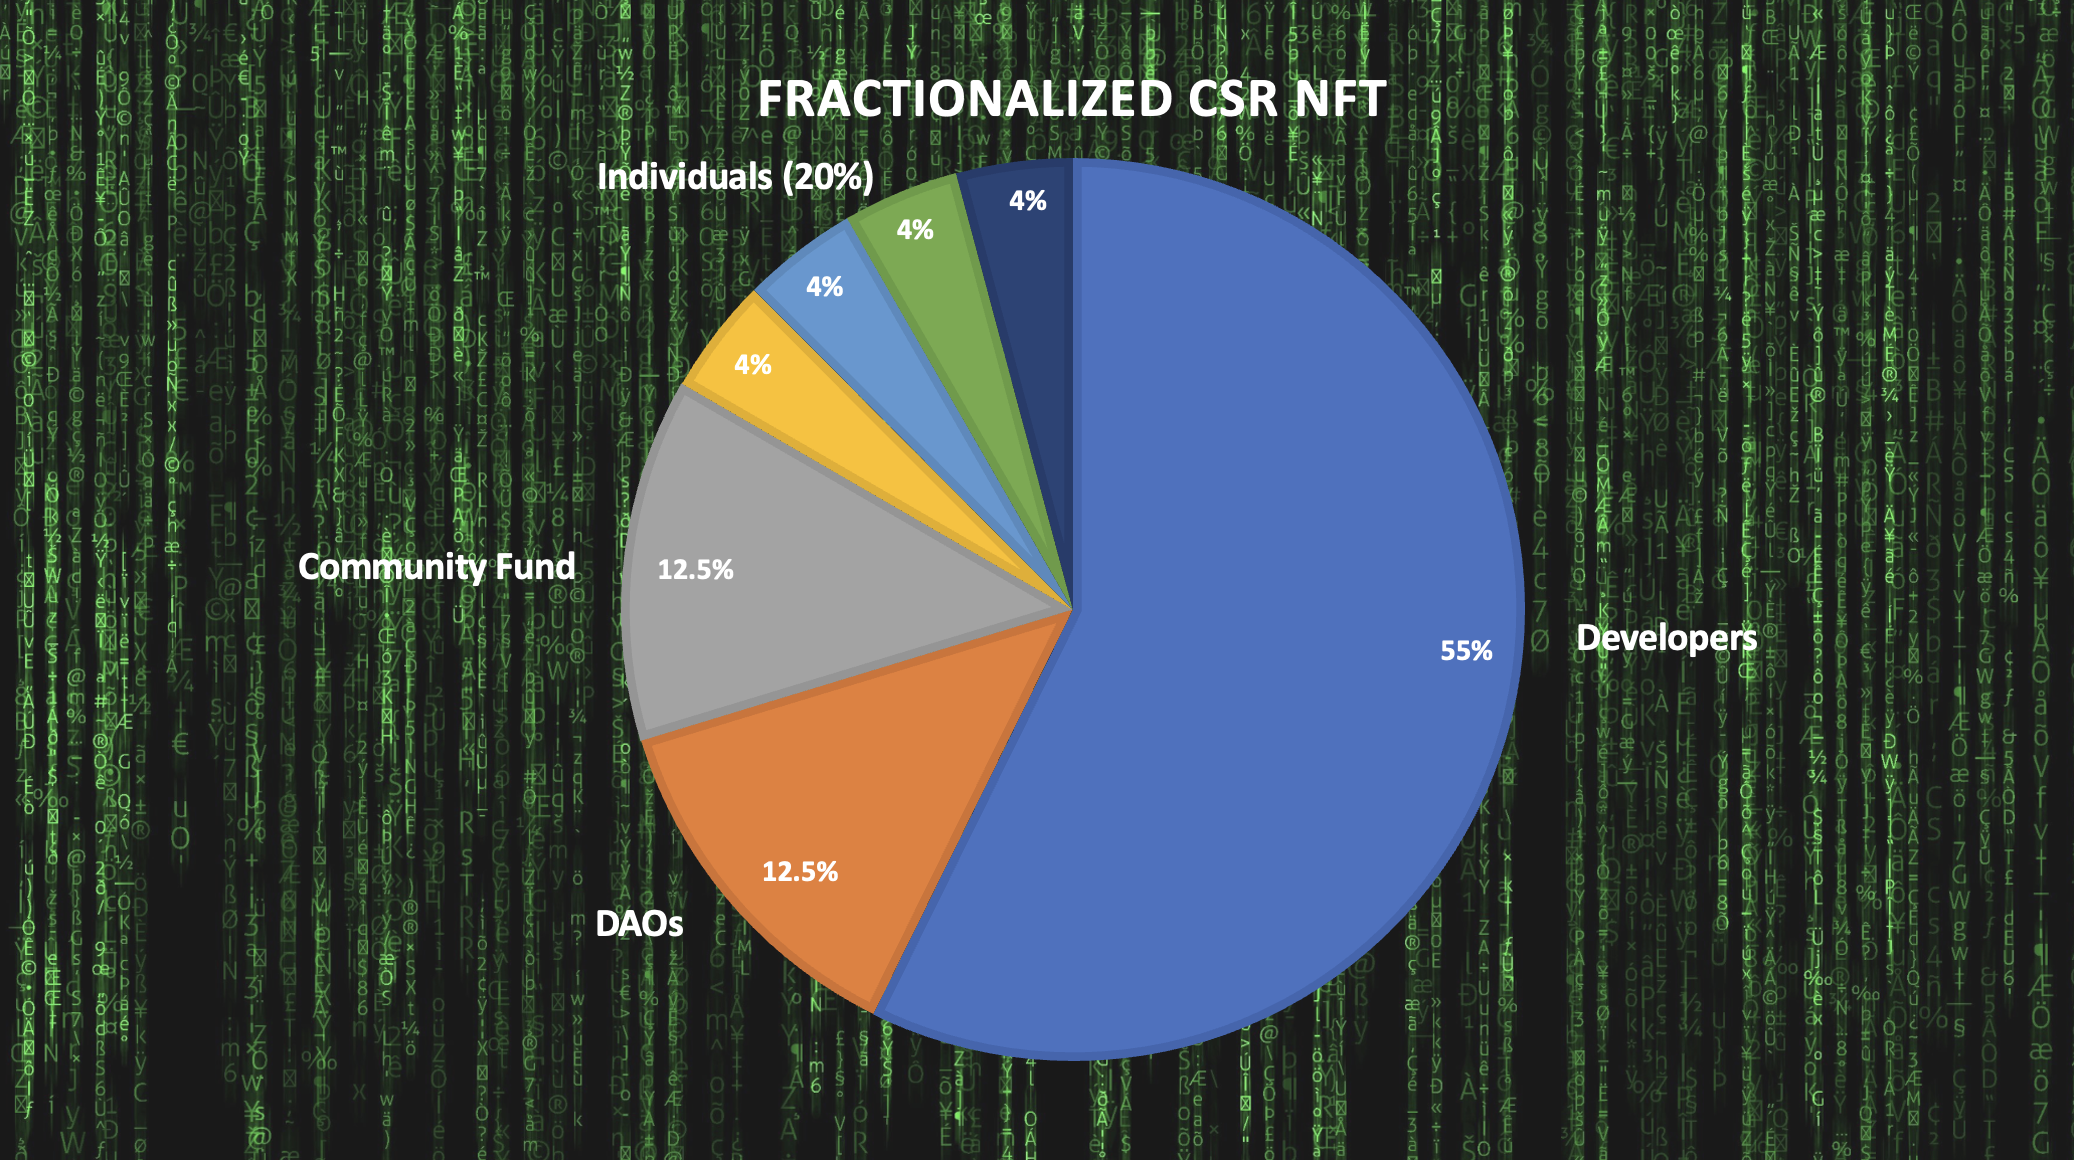 Example of a fractionalized CSR NFT